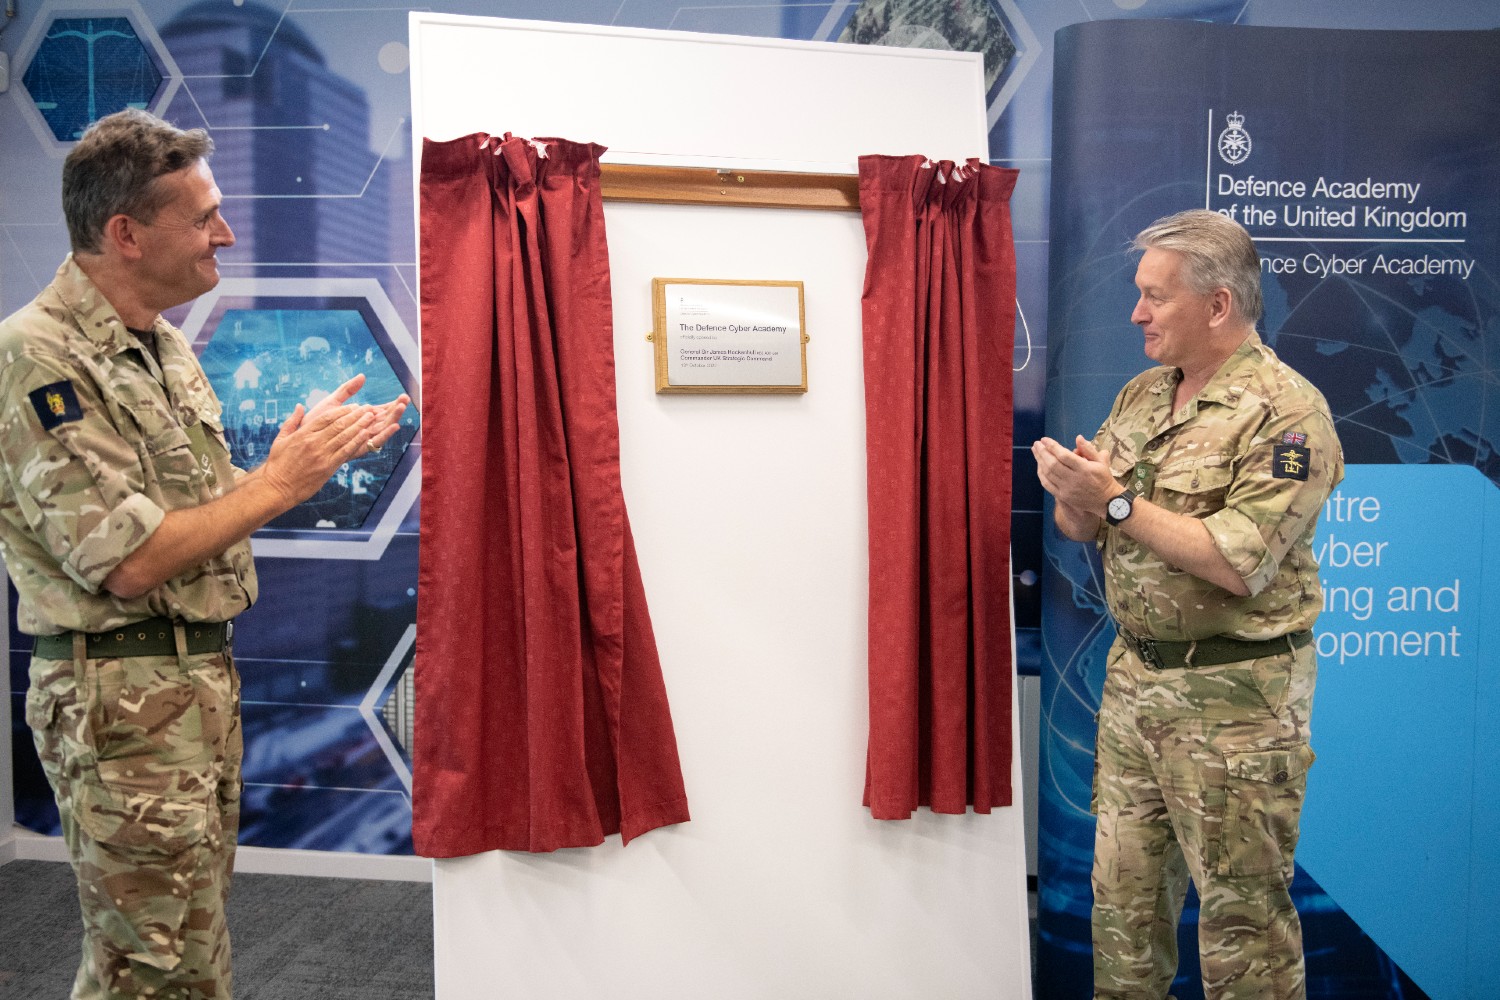 Sir Gen Hockenhull and Maj Gen Andrews unveiling plaque in the Defence Cyber Academy